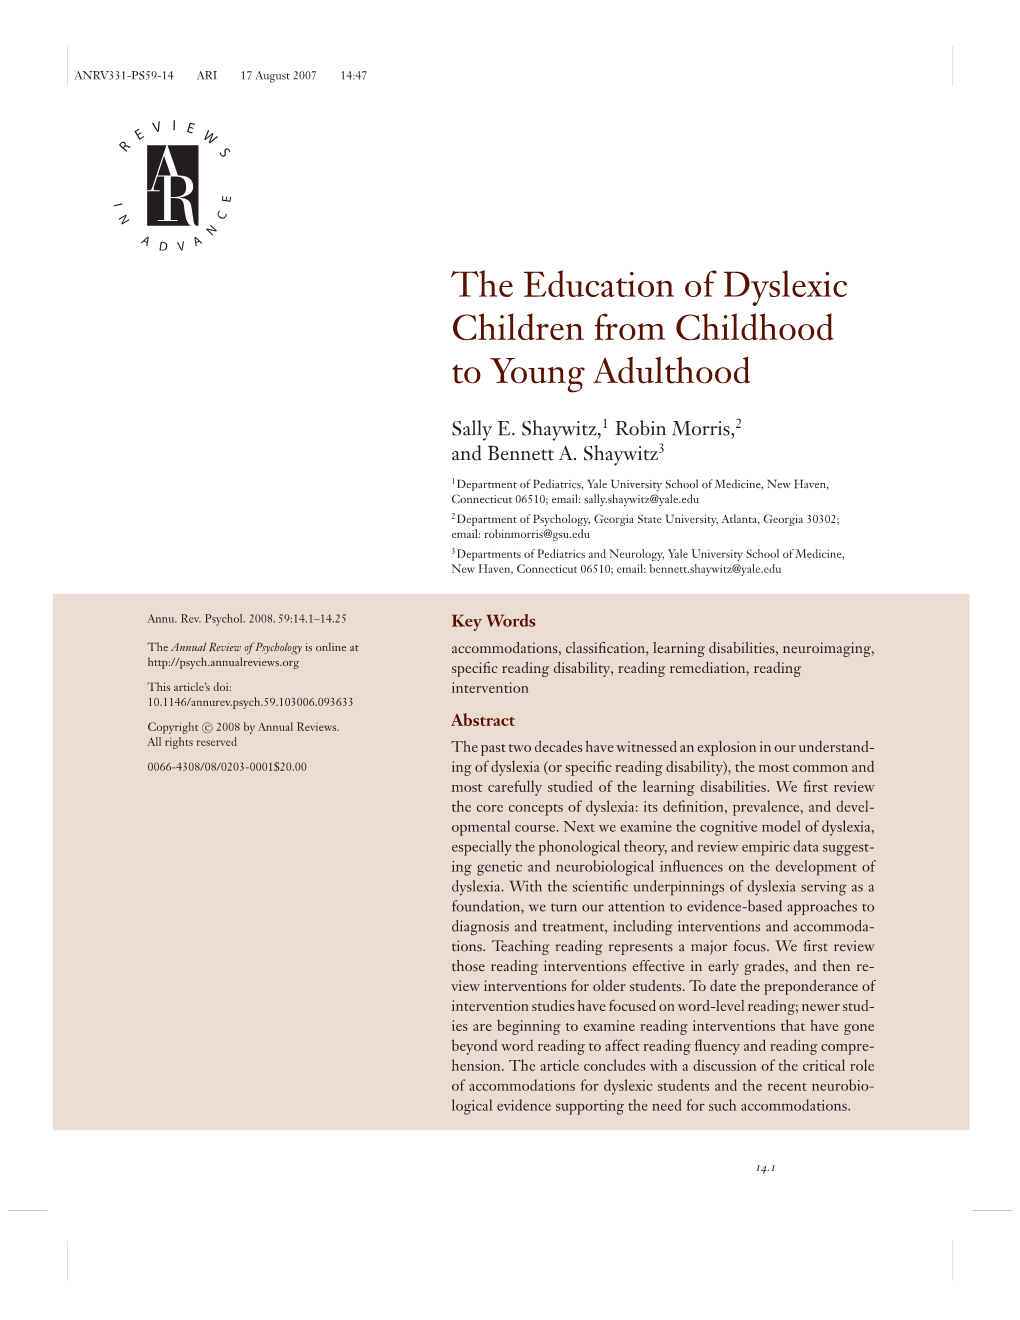 The Education of Dyslexic Children from Childhood to Young Adulthood